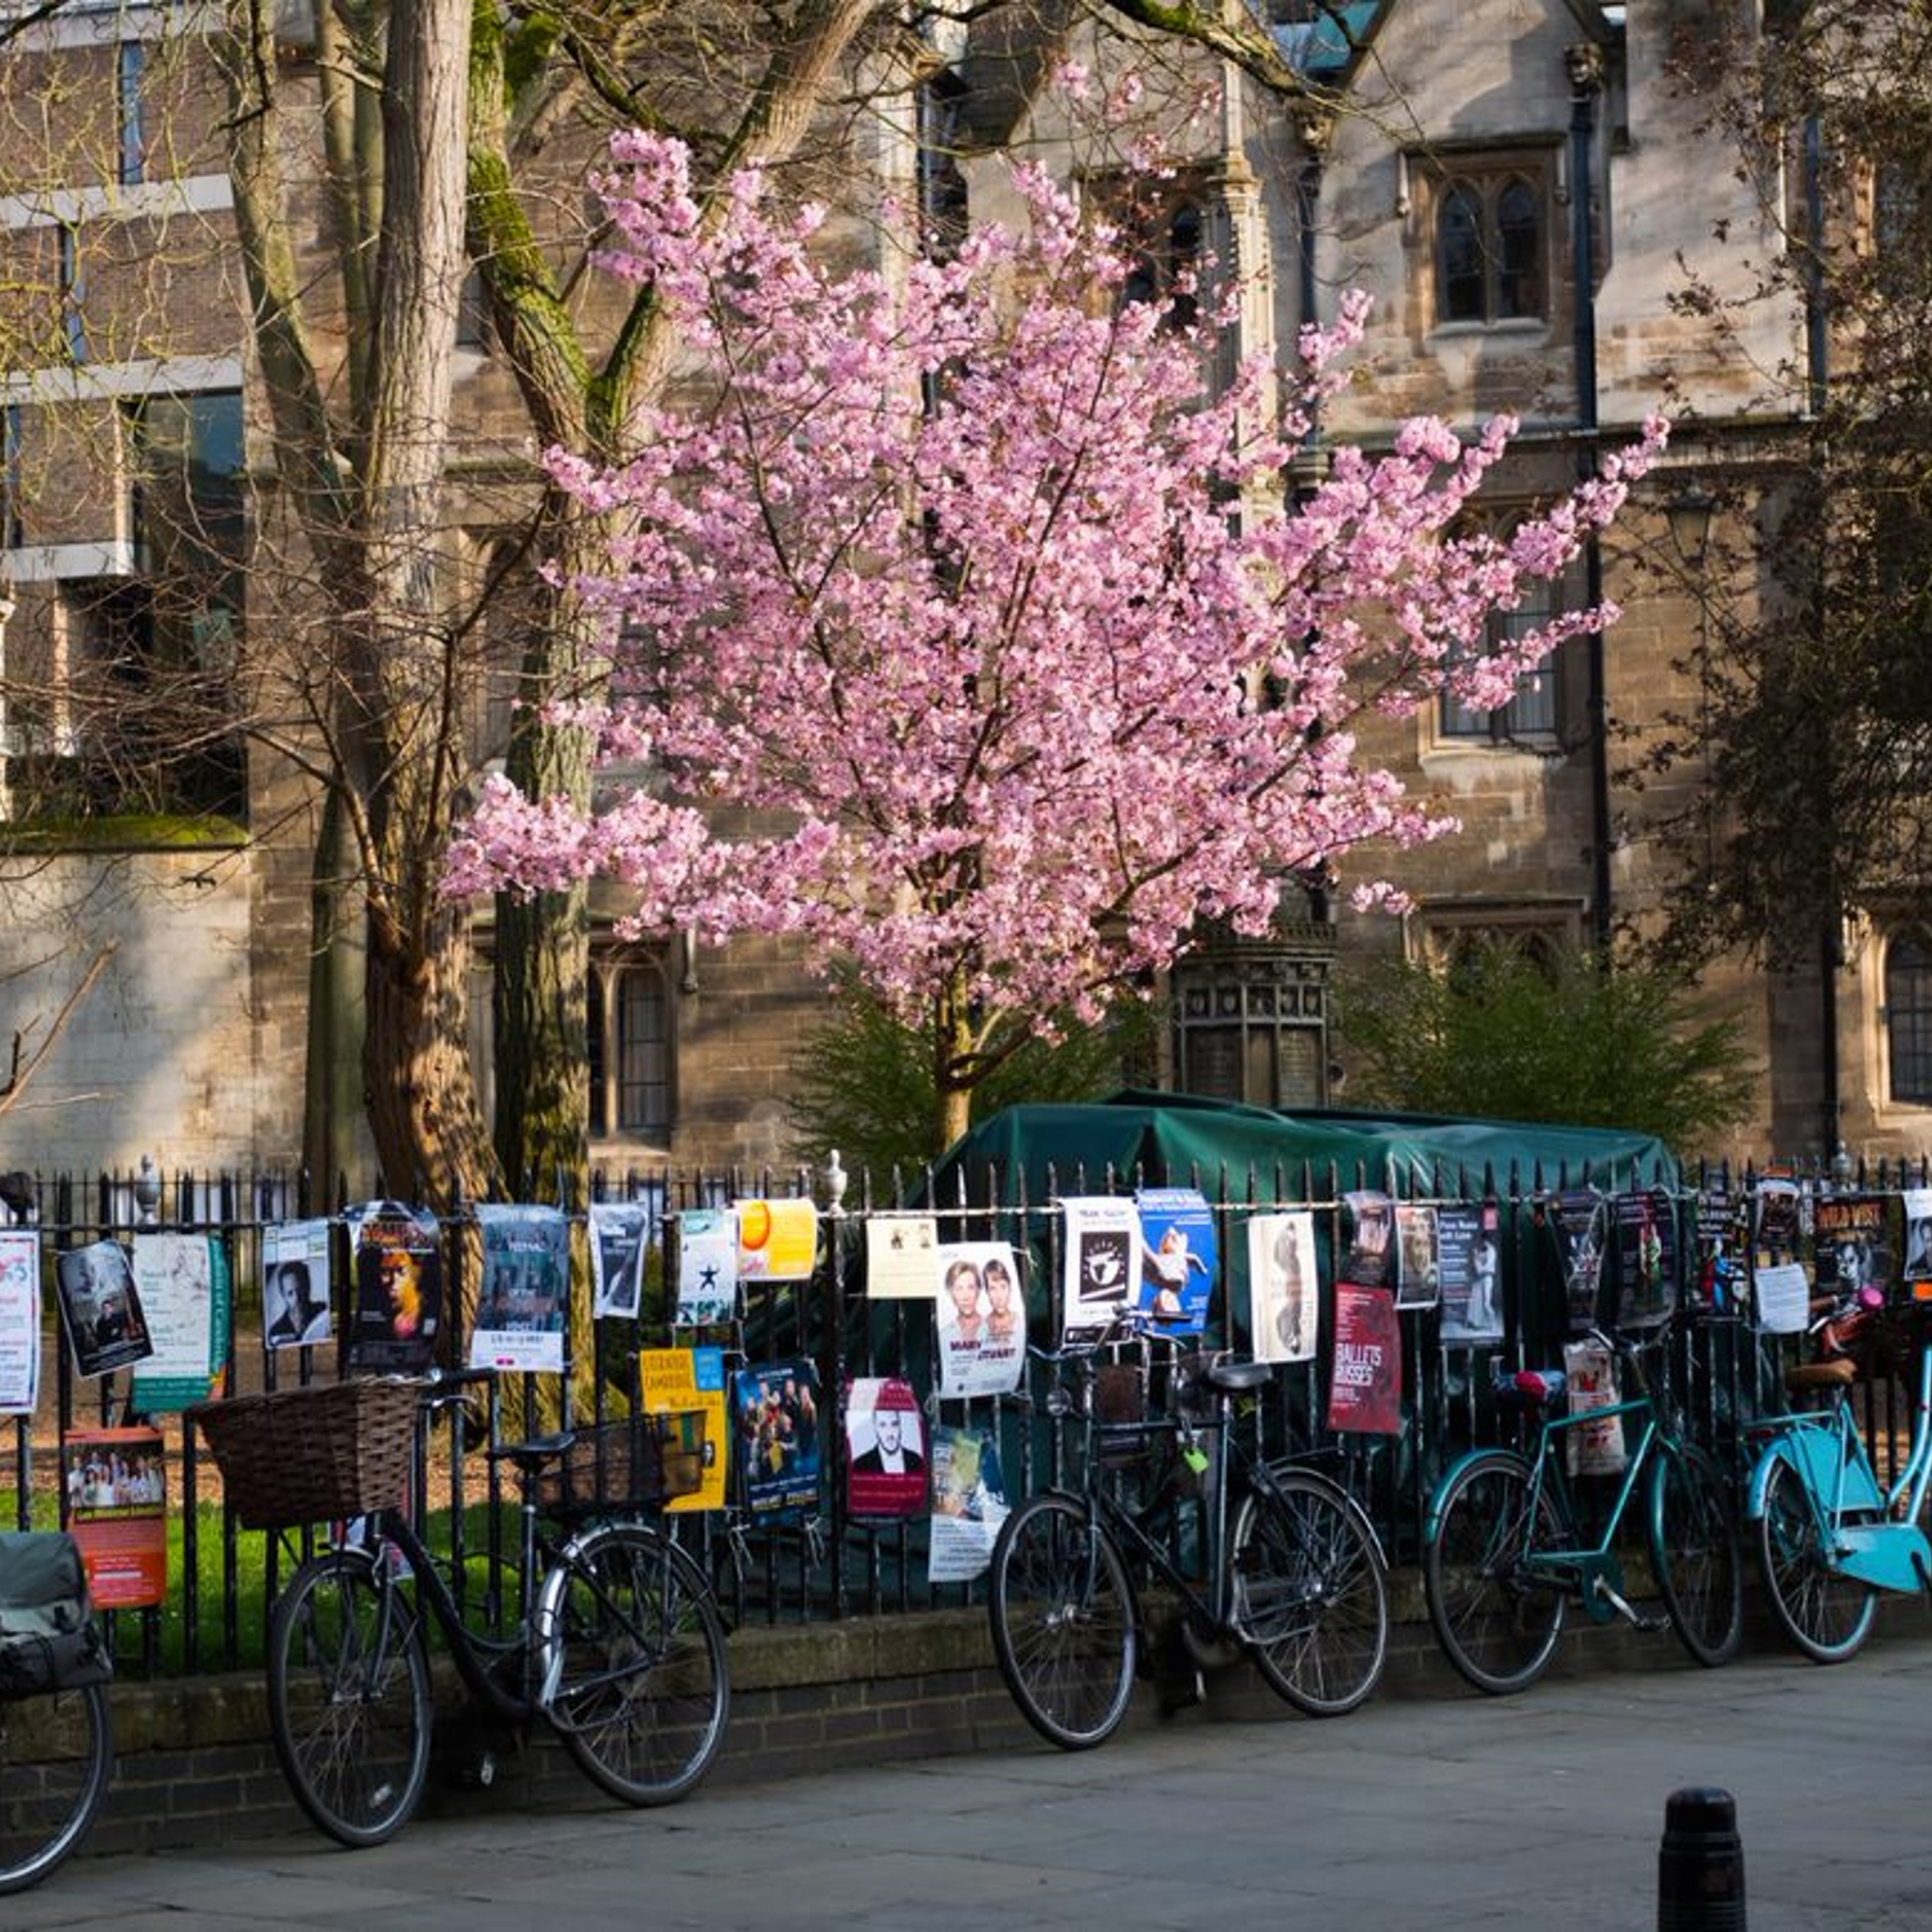 Bikes chained to a fence covered in posters underneath a pink cherry blossom tree.